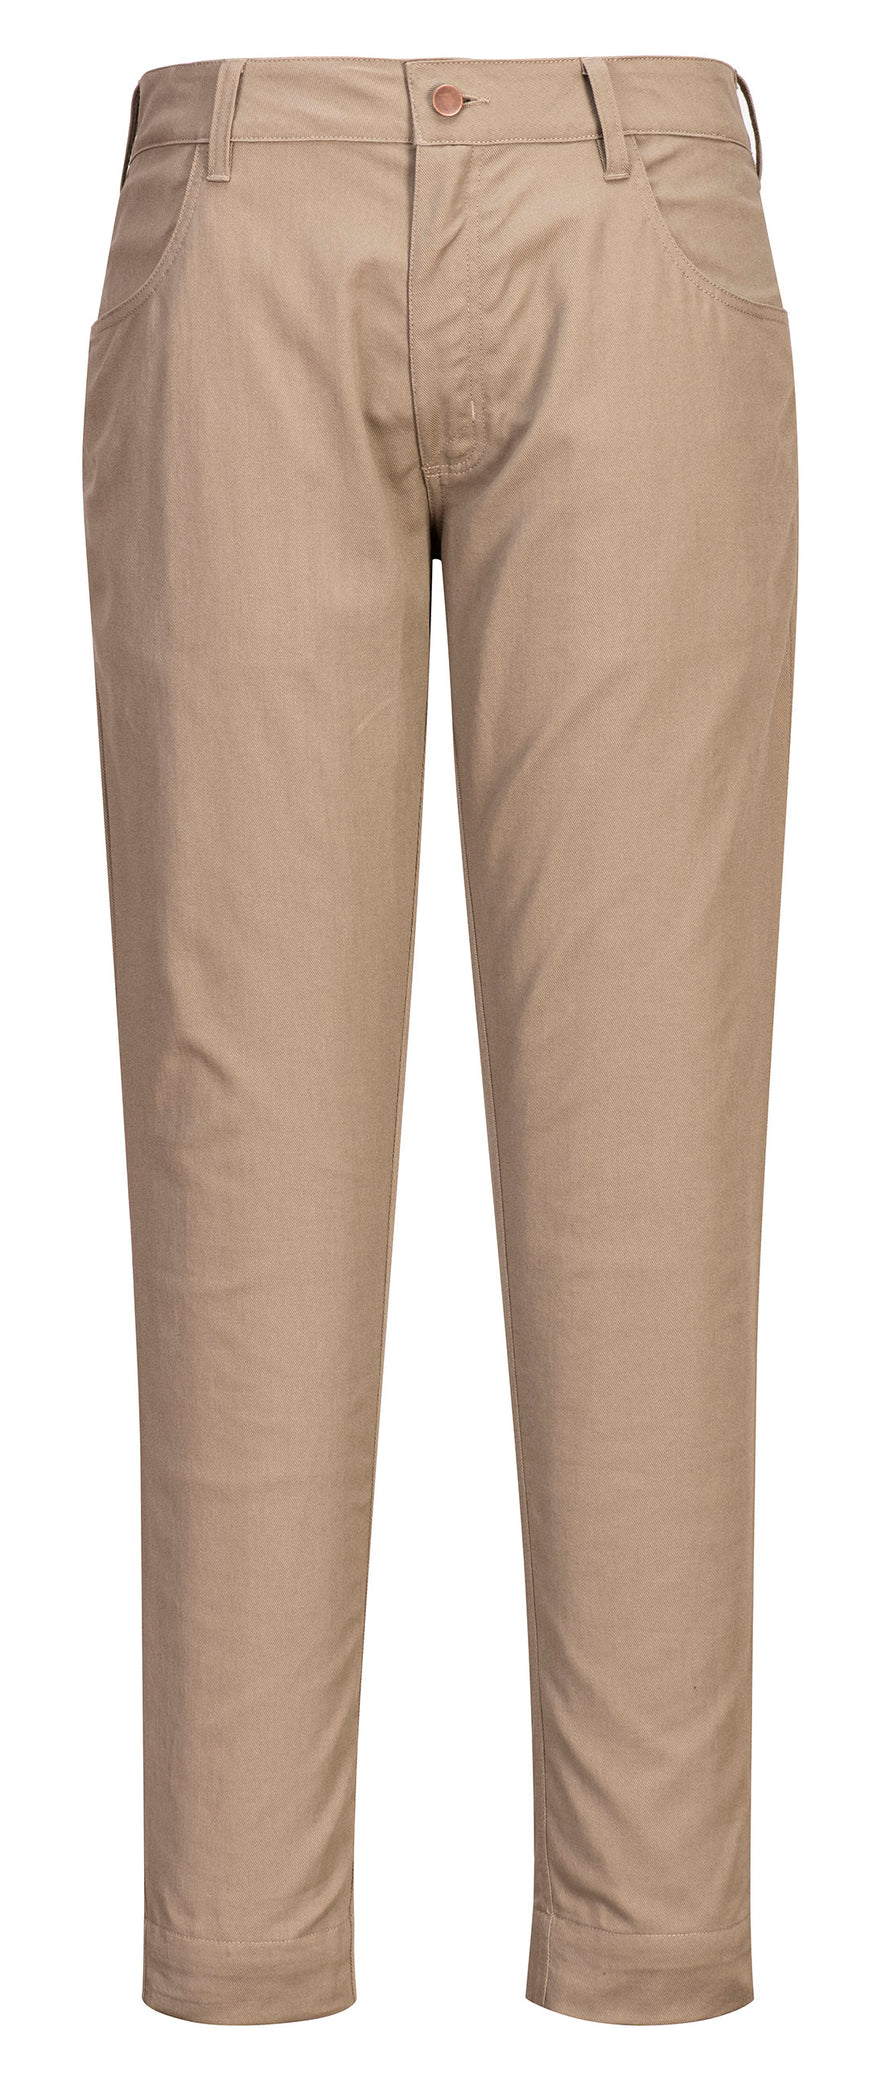 Portwest Flame Resistant Stretch Trousers in khaki with button ad zip fastening, belt loops on waist band and two pockets at top.